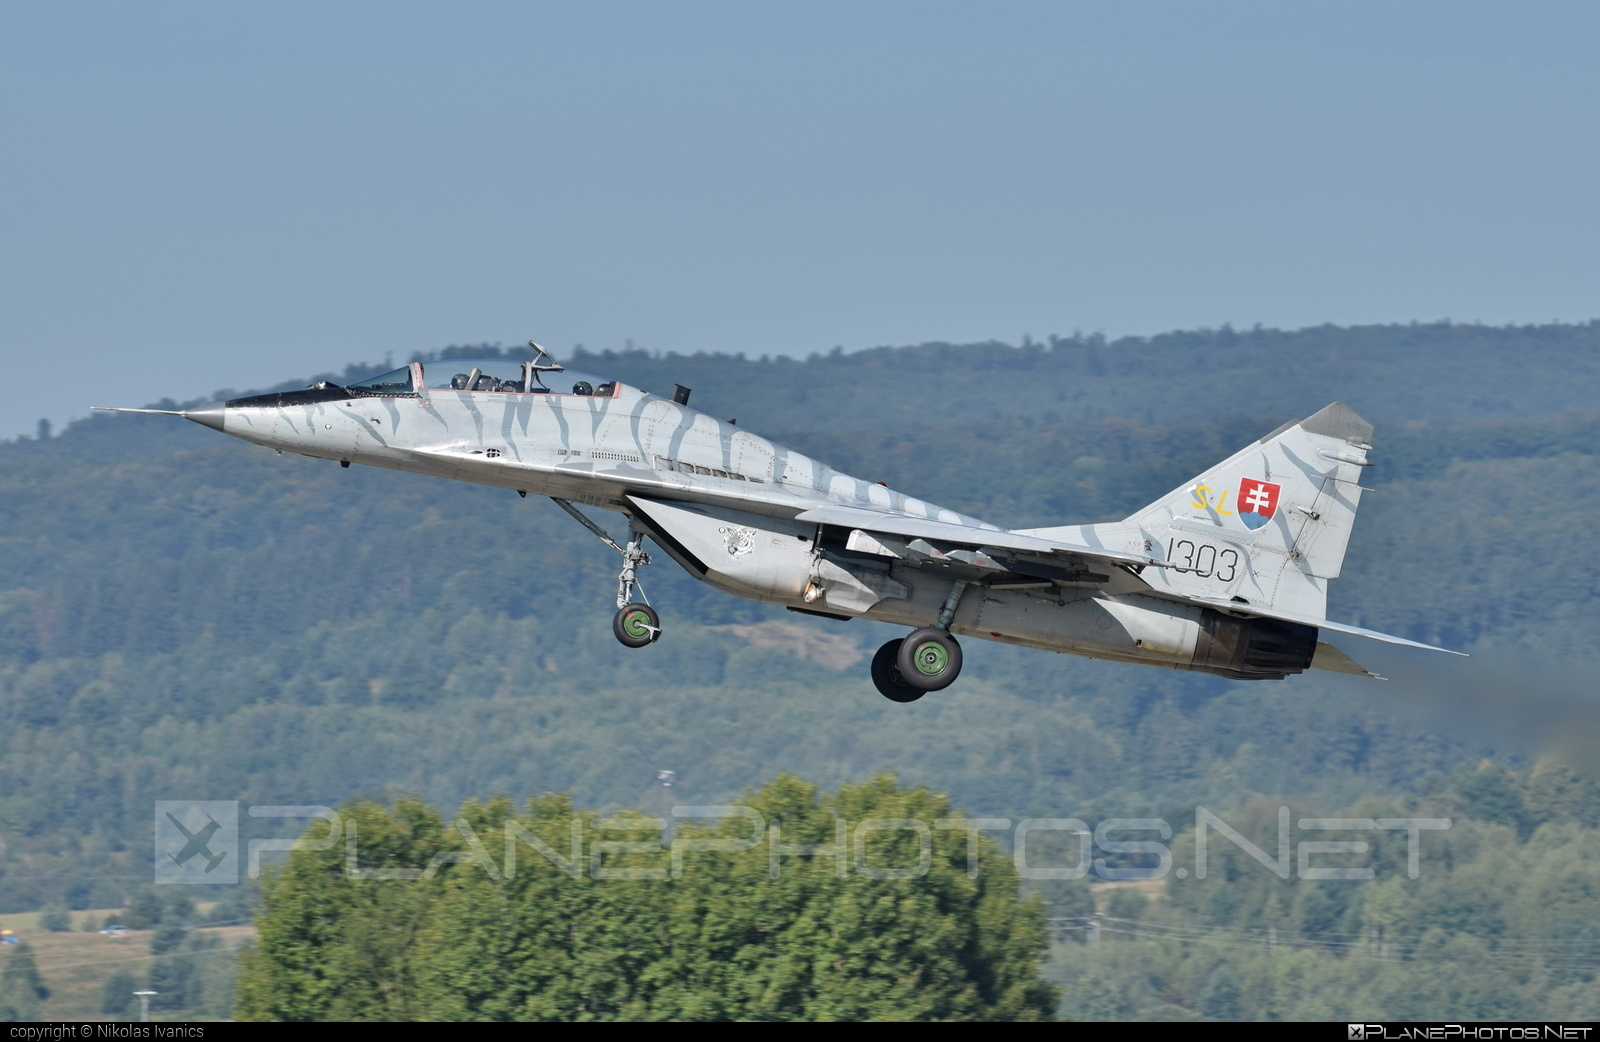 Mikoyan-Gurevich MiG-29UBS - 1303 operated by Vzdušné sily OS SR (Slovak Air Force) #mig #mig29 #mig29ubs #mikoyangurevich #slovakairforce #vzdusnesilyossr